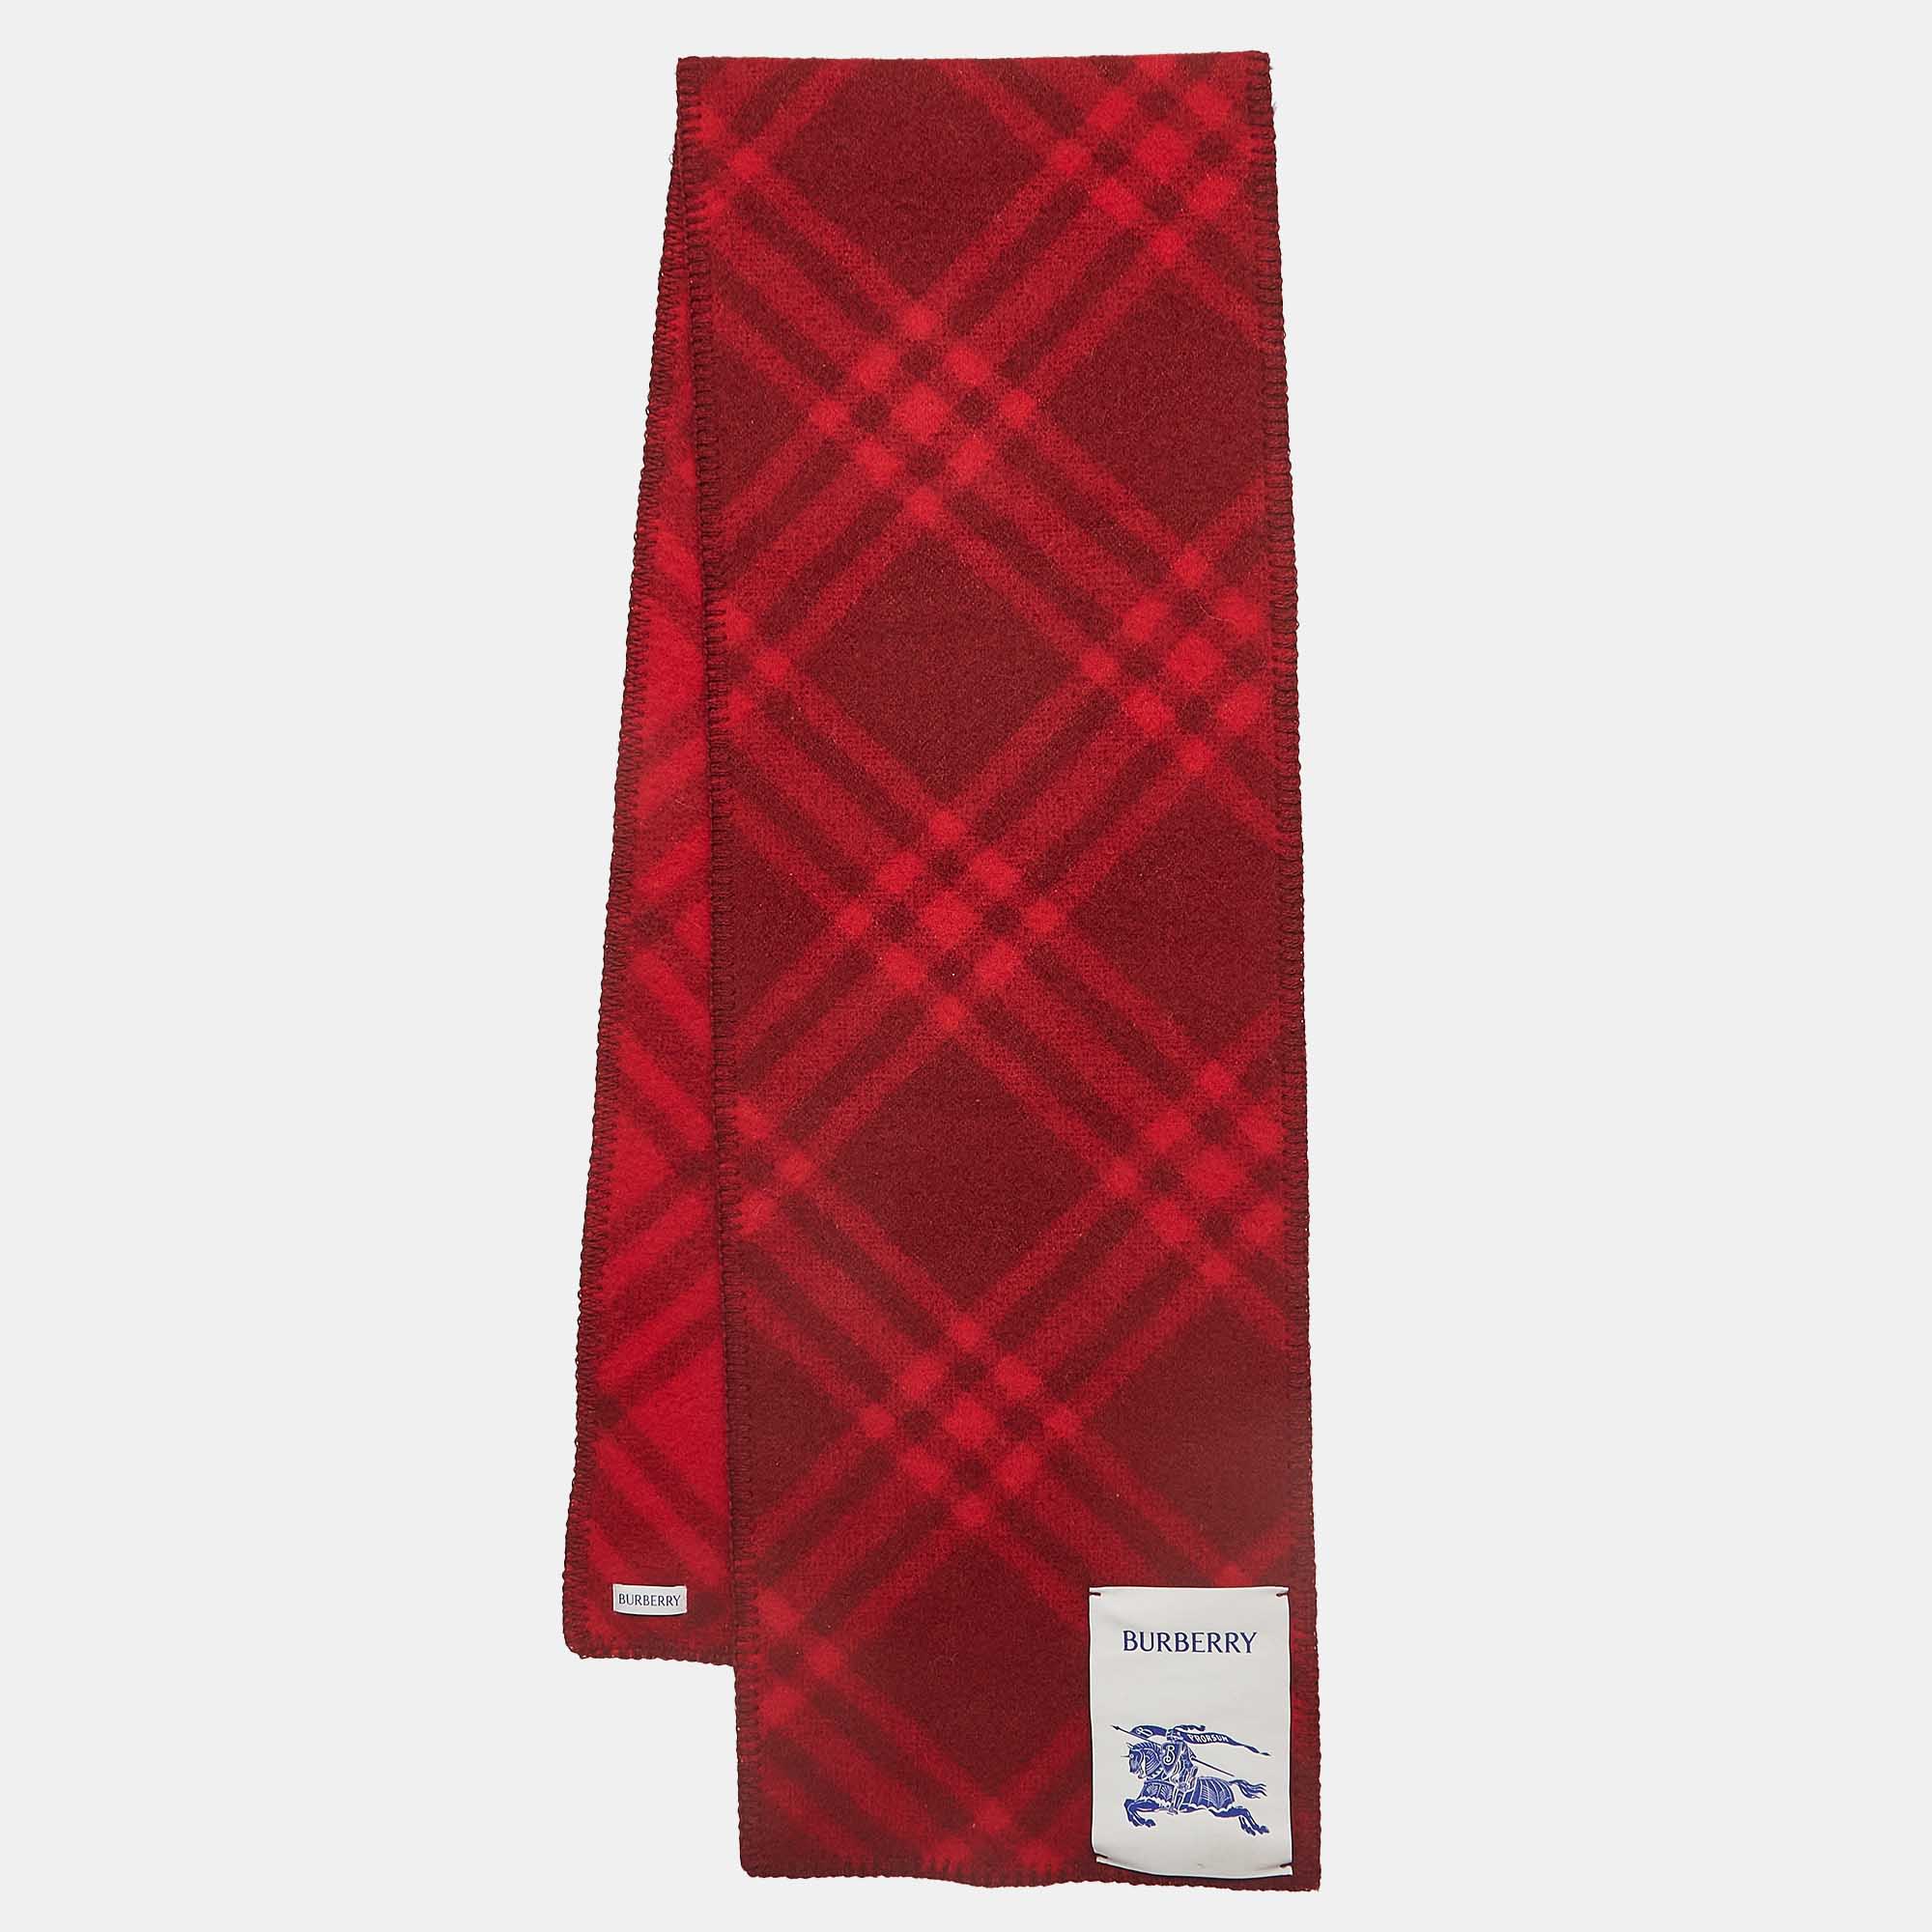 Burberry red tri bar check wool scarf